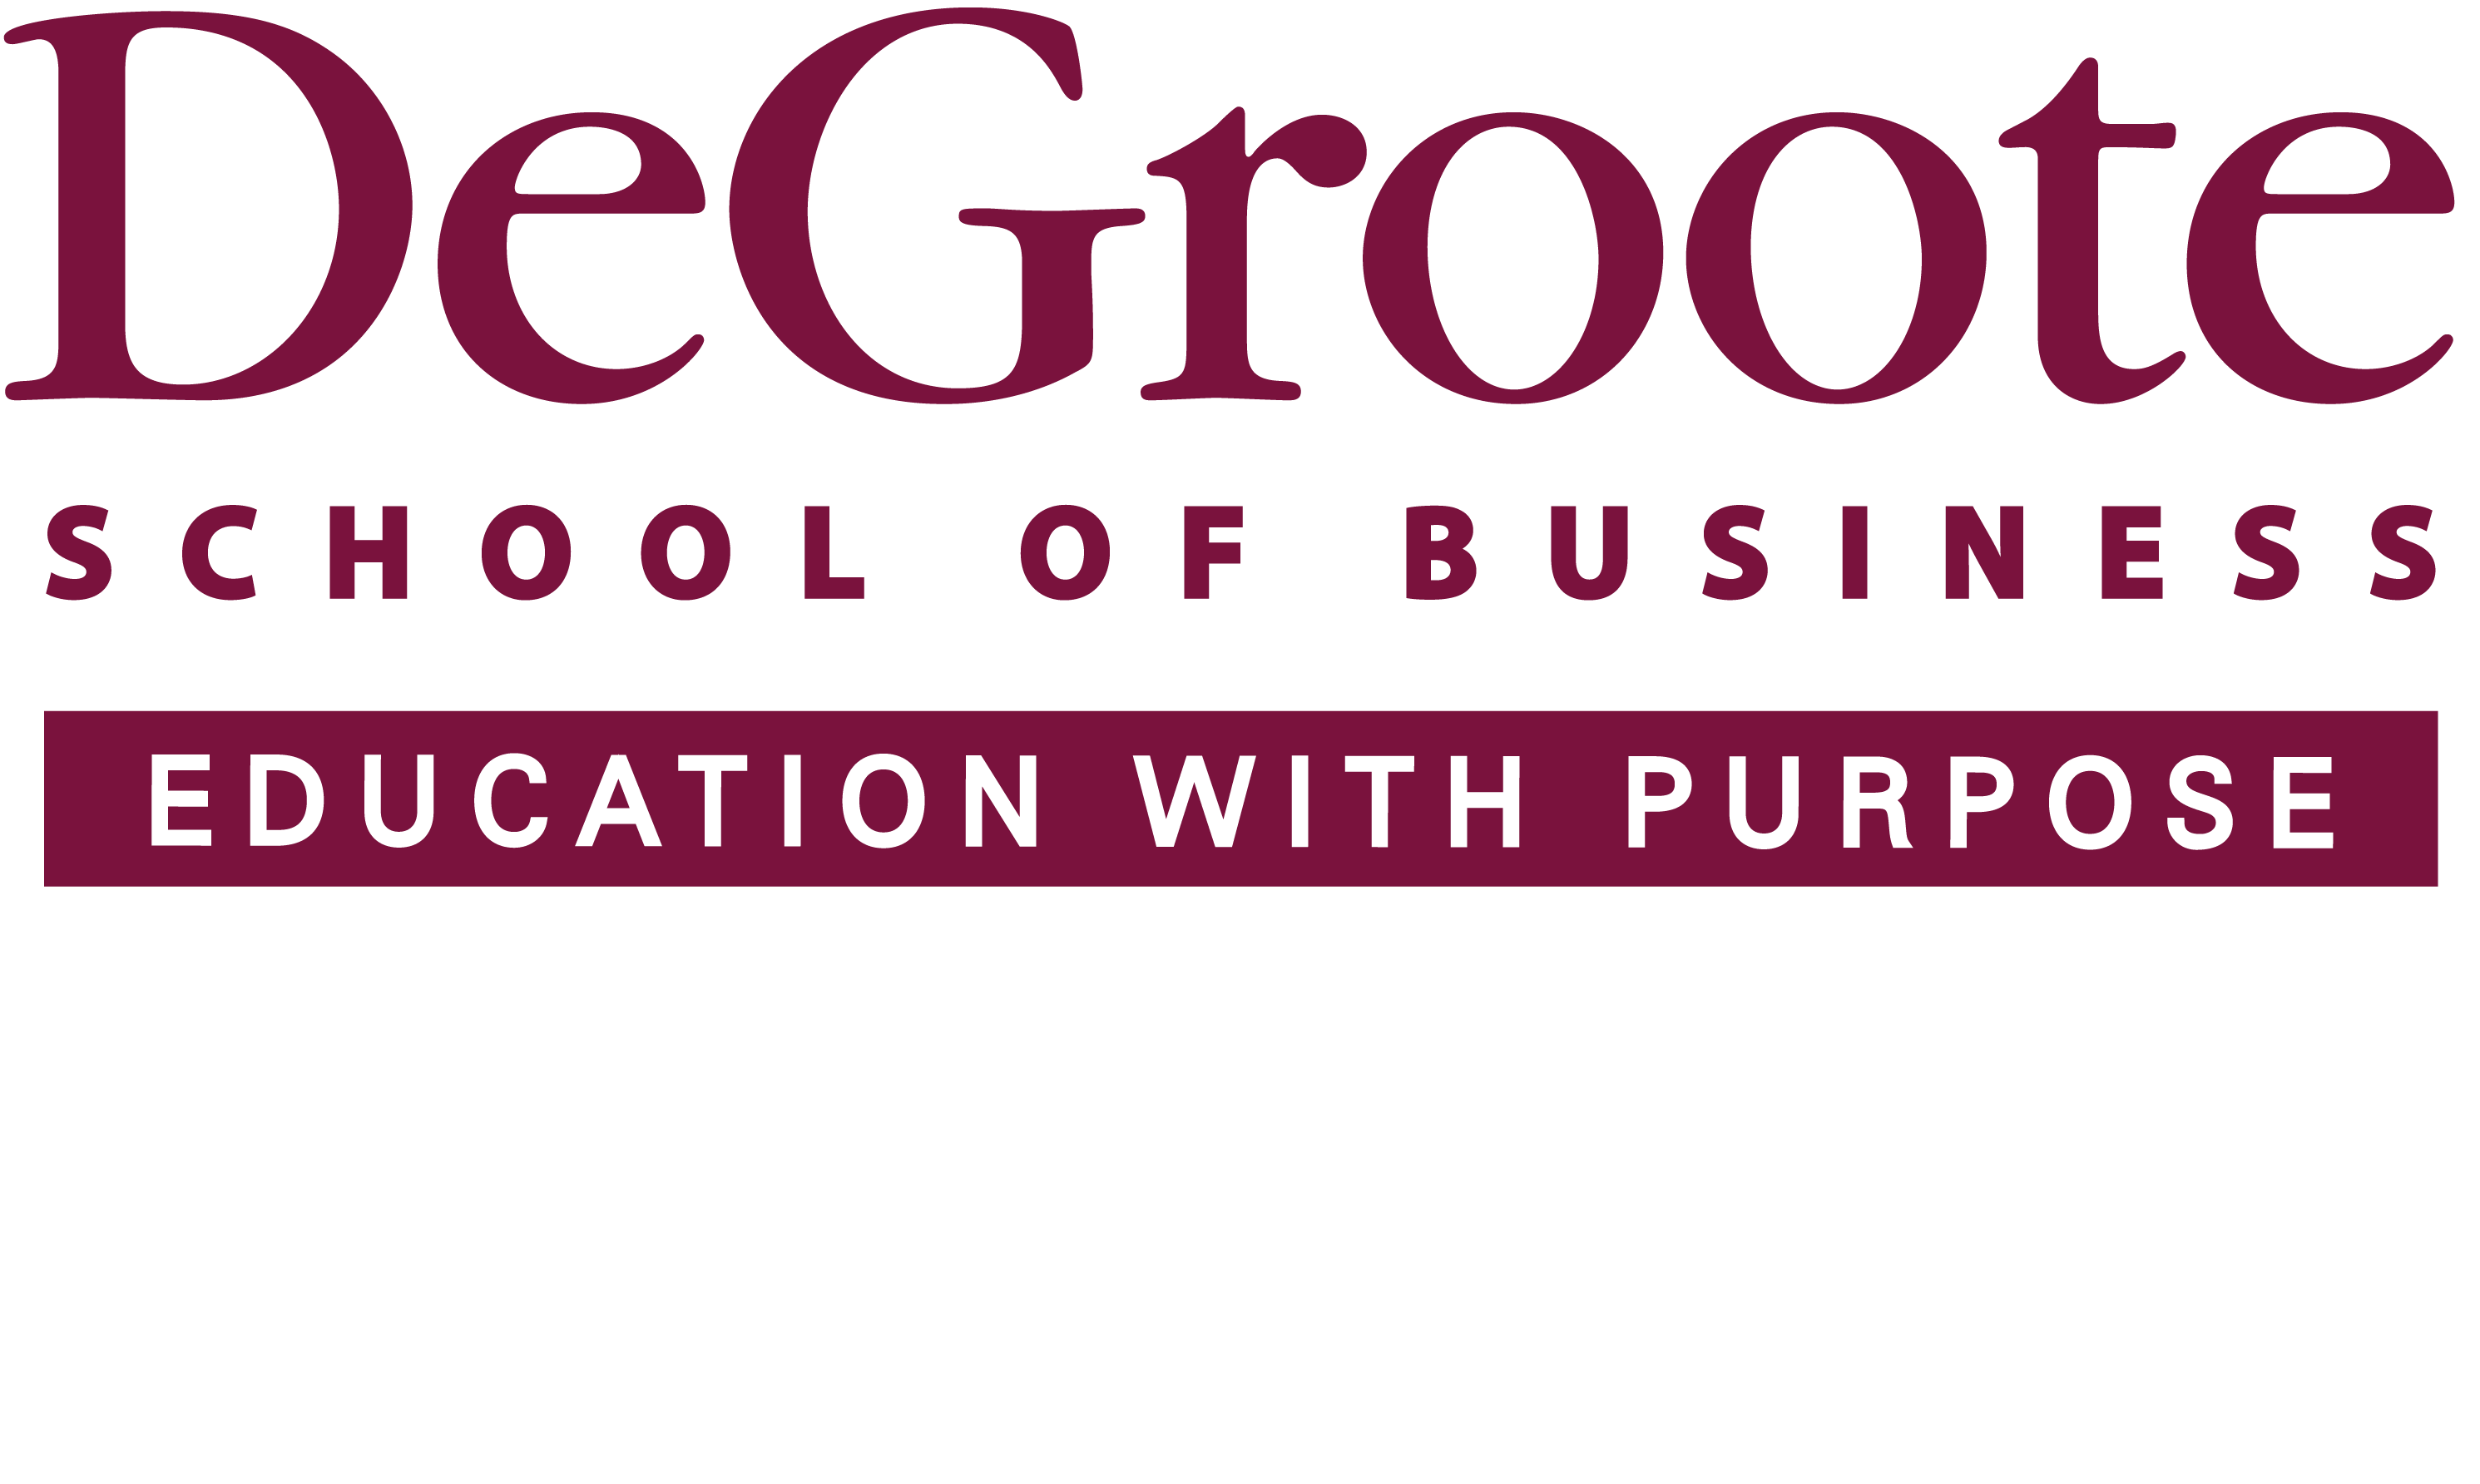 DeGroote School of Business - Education with Purpose